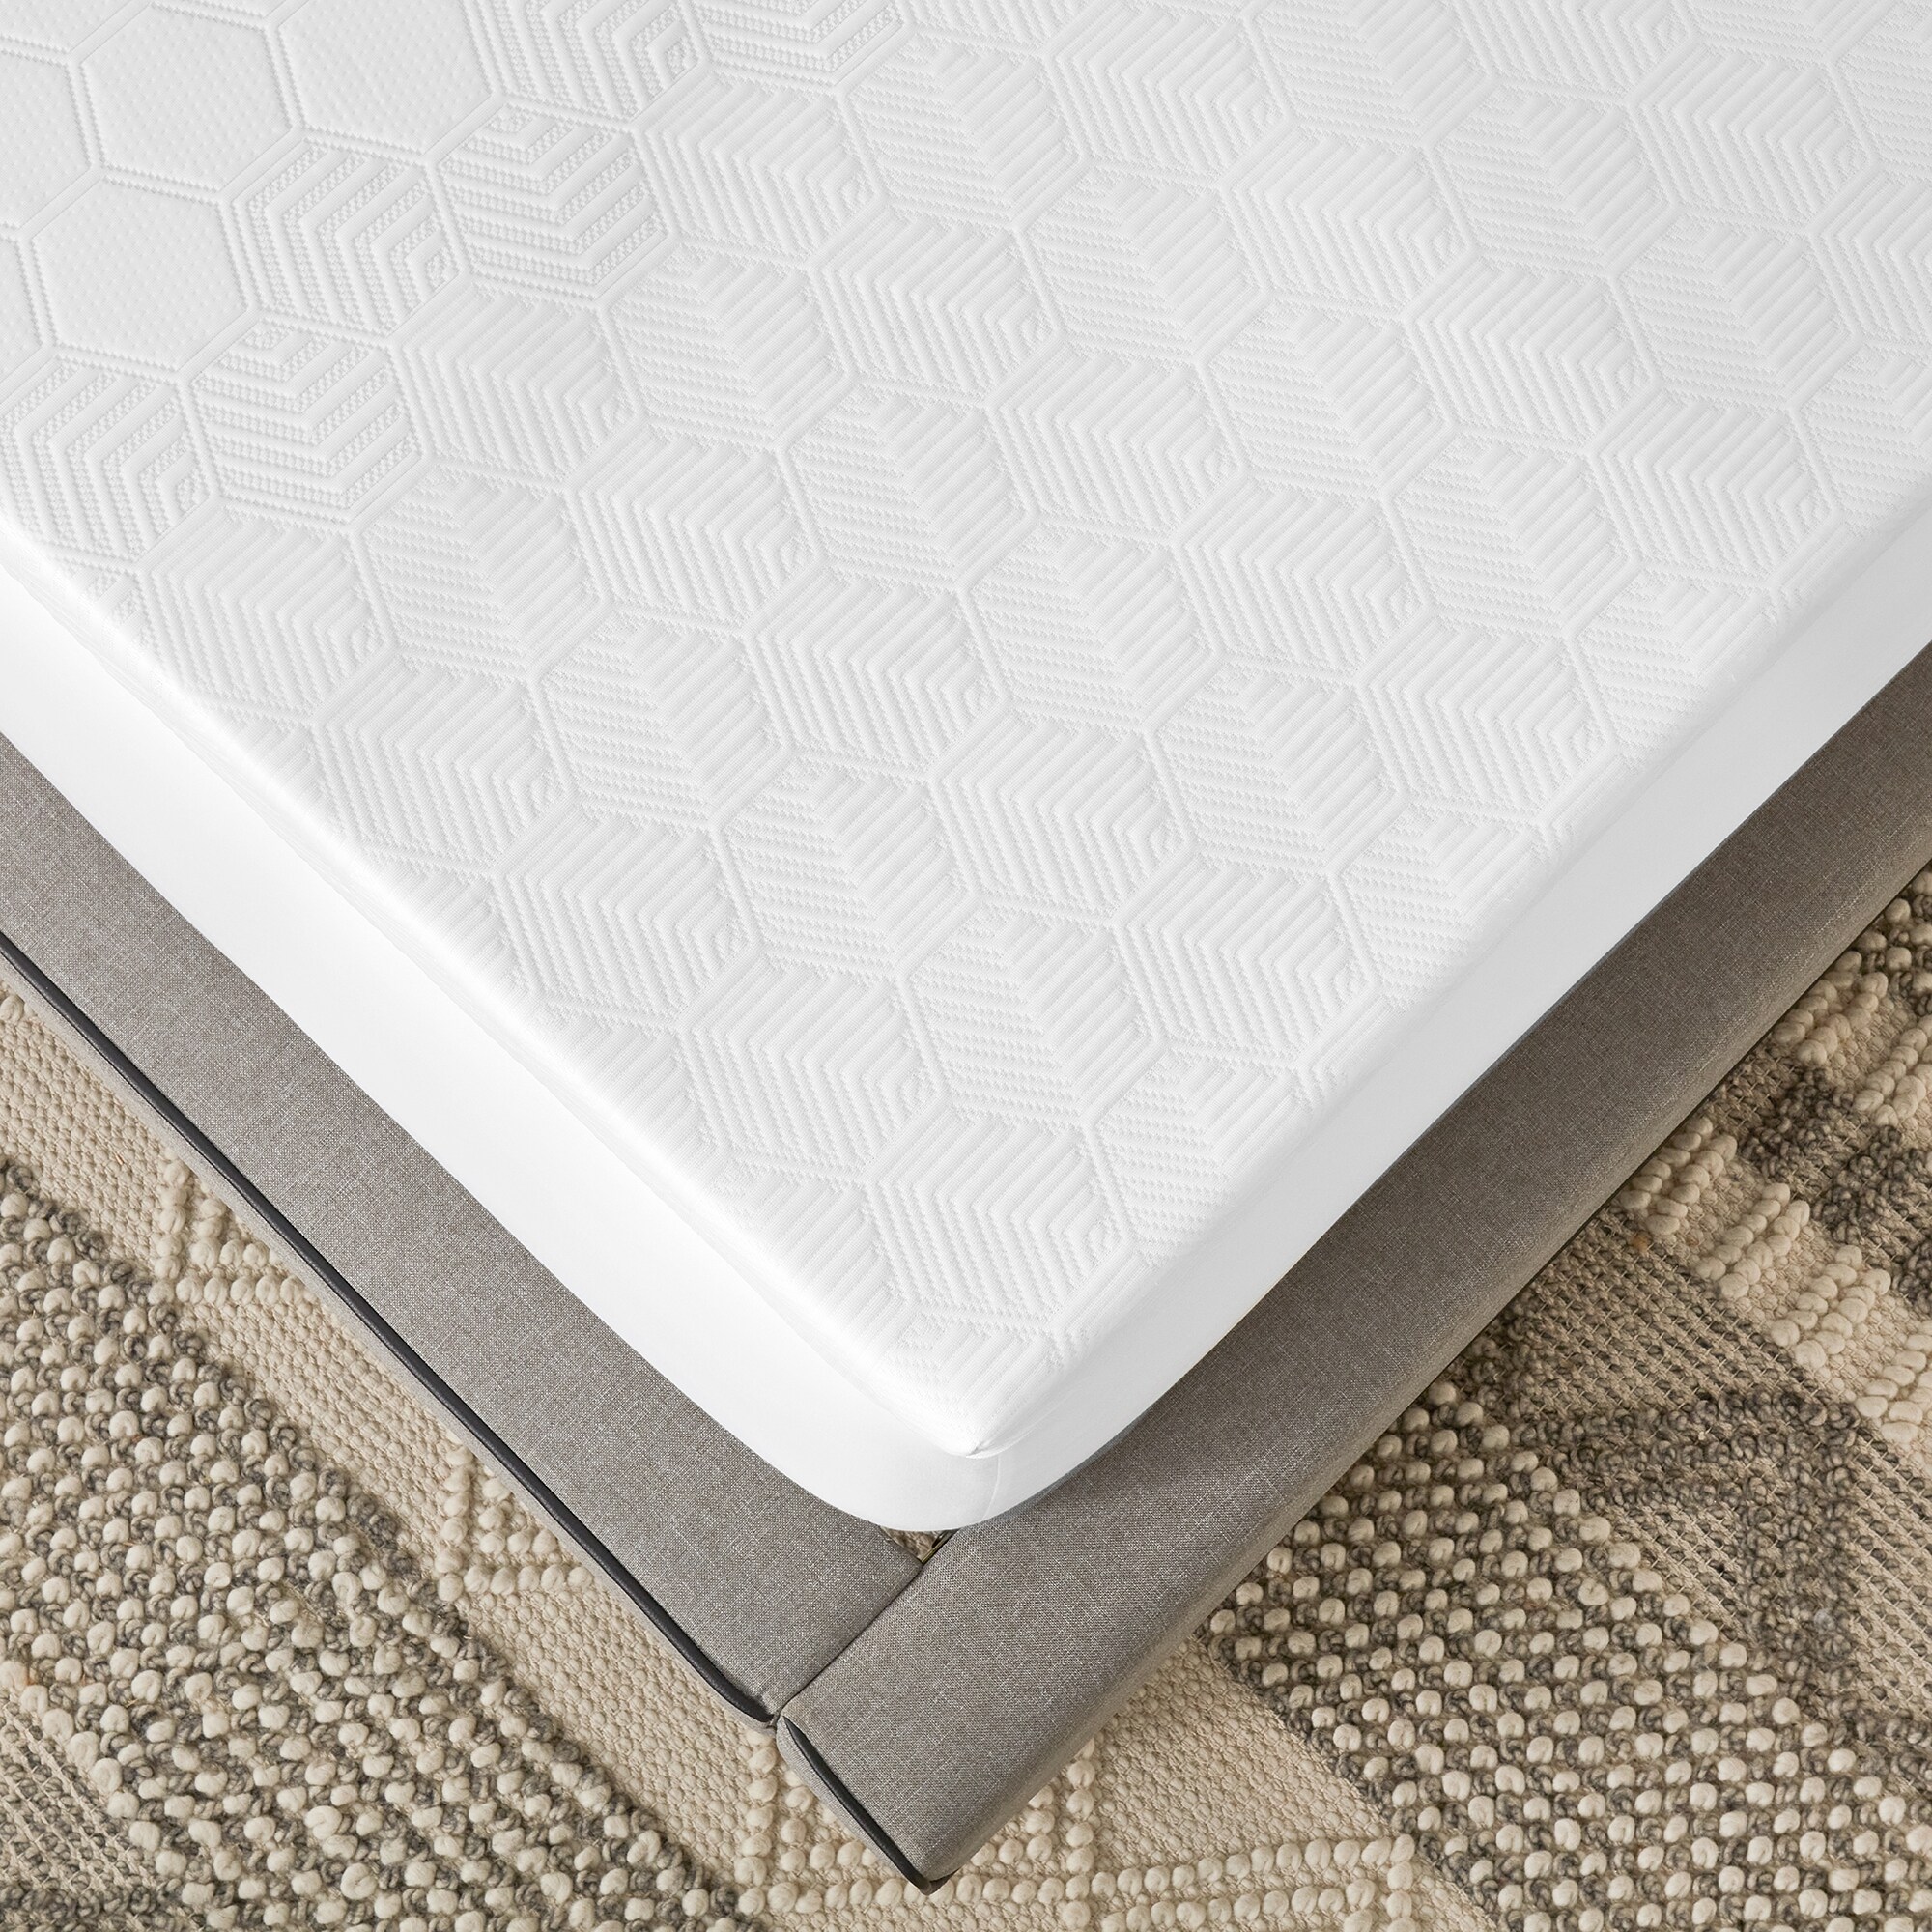 https://ak1.ostkcdn.com/images/products/is/images/direct/1f1bb37e3dab2156a8fa5171c59eabb87349da52/Bodipedic-Cooling-3-Inch-Memory-Foam-Mattress-Topper-with-Cooling-Cover.jpg